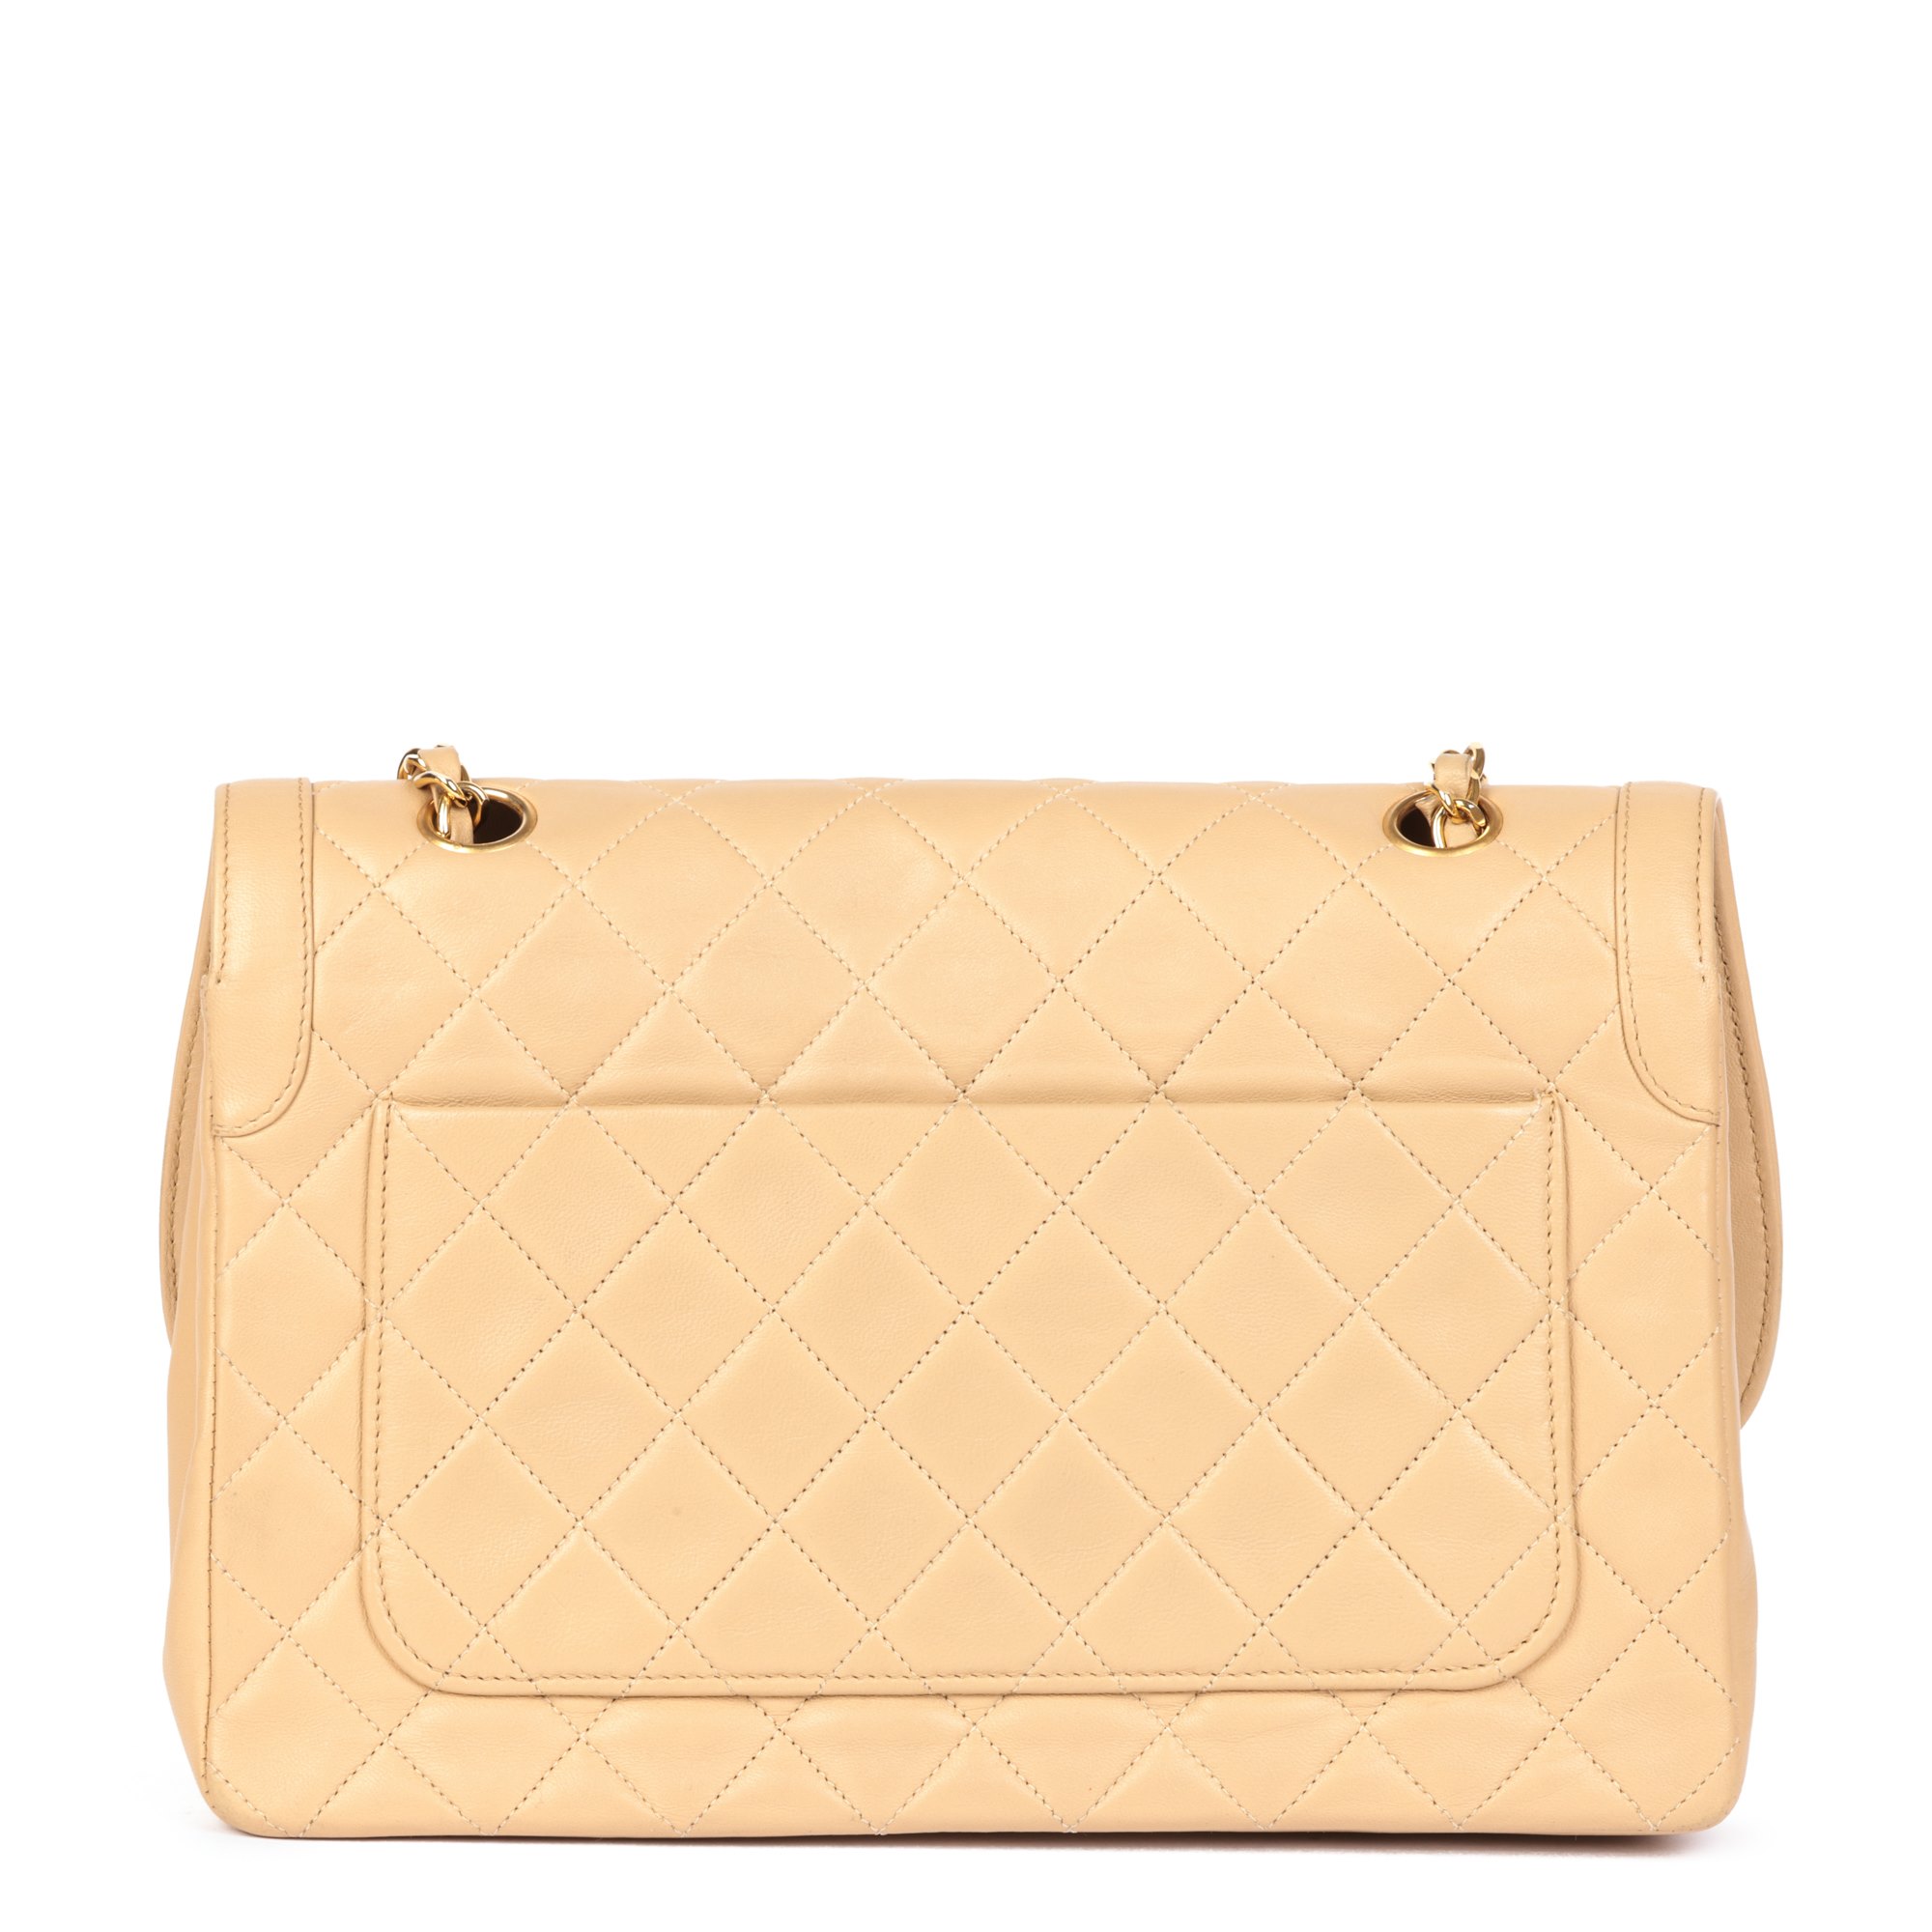 Chanel Beige Quilted Lambskin Vintage Medium Classic Single Flap Bag with Wallet